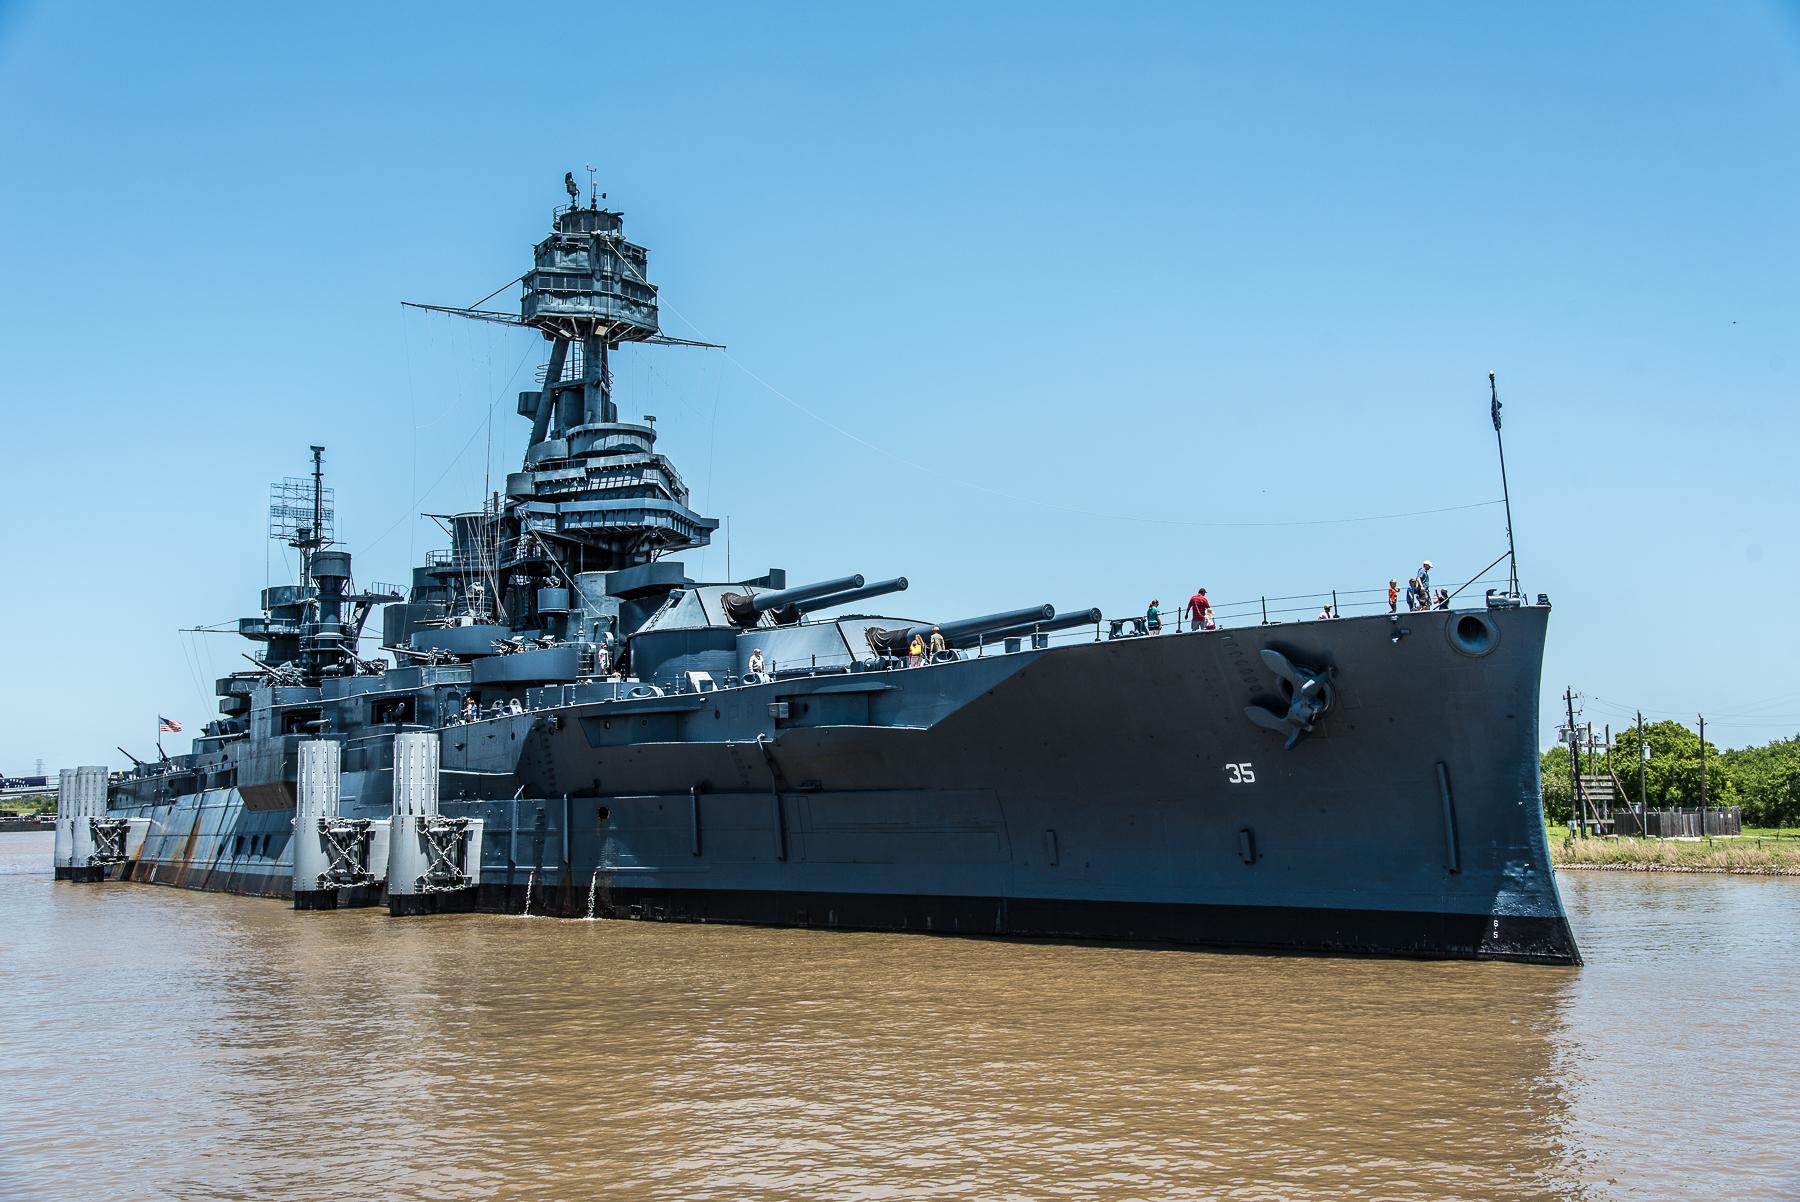 Battleship Texas Visiting Hours Reduced To Prepare For Repair